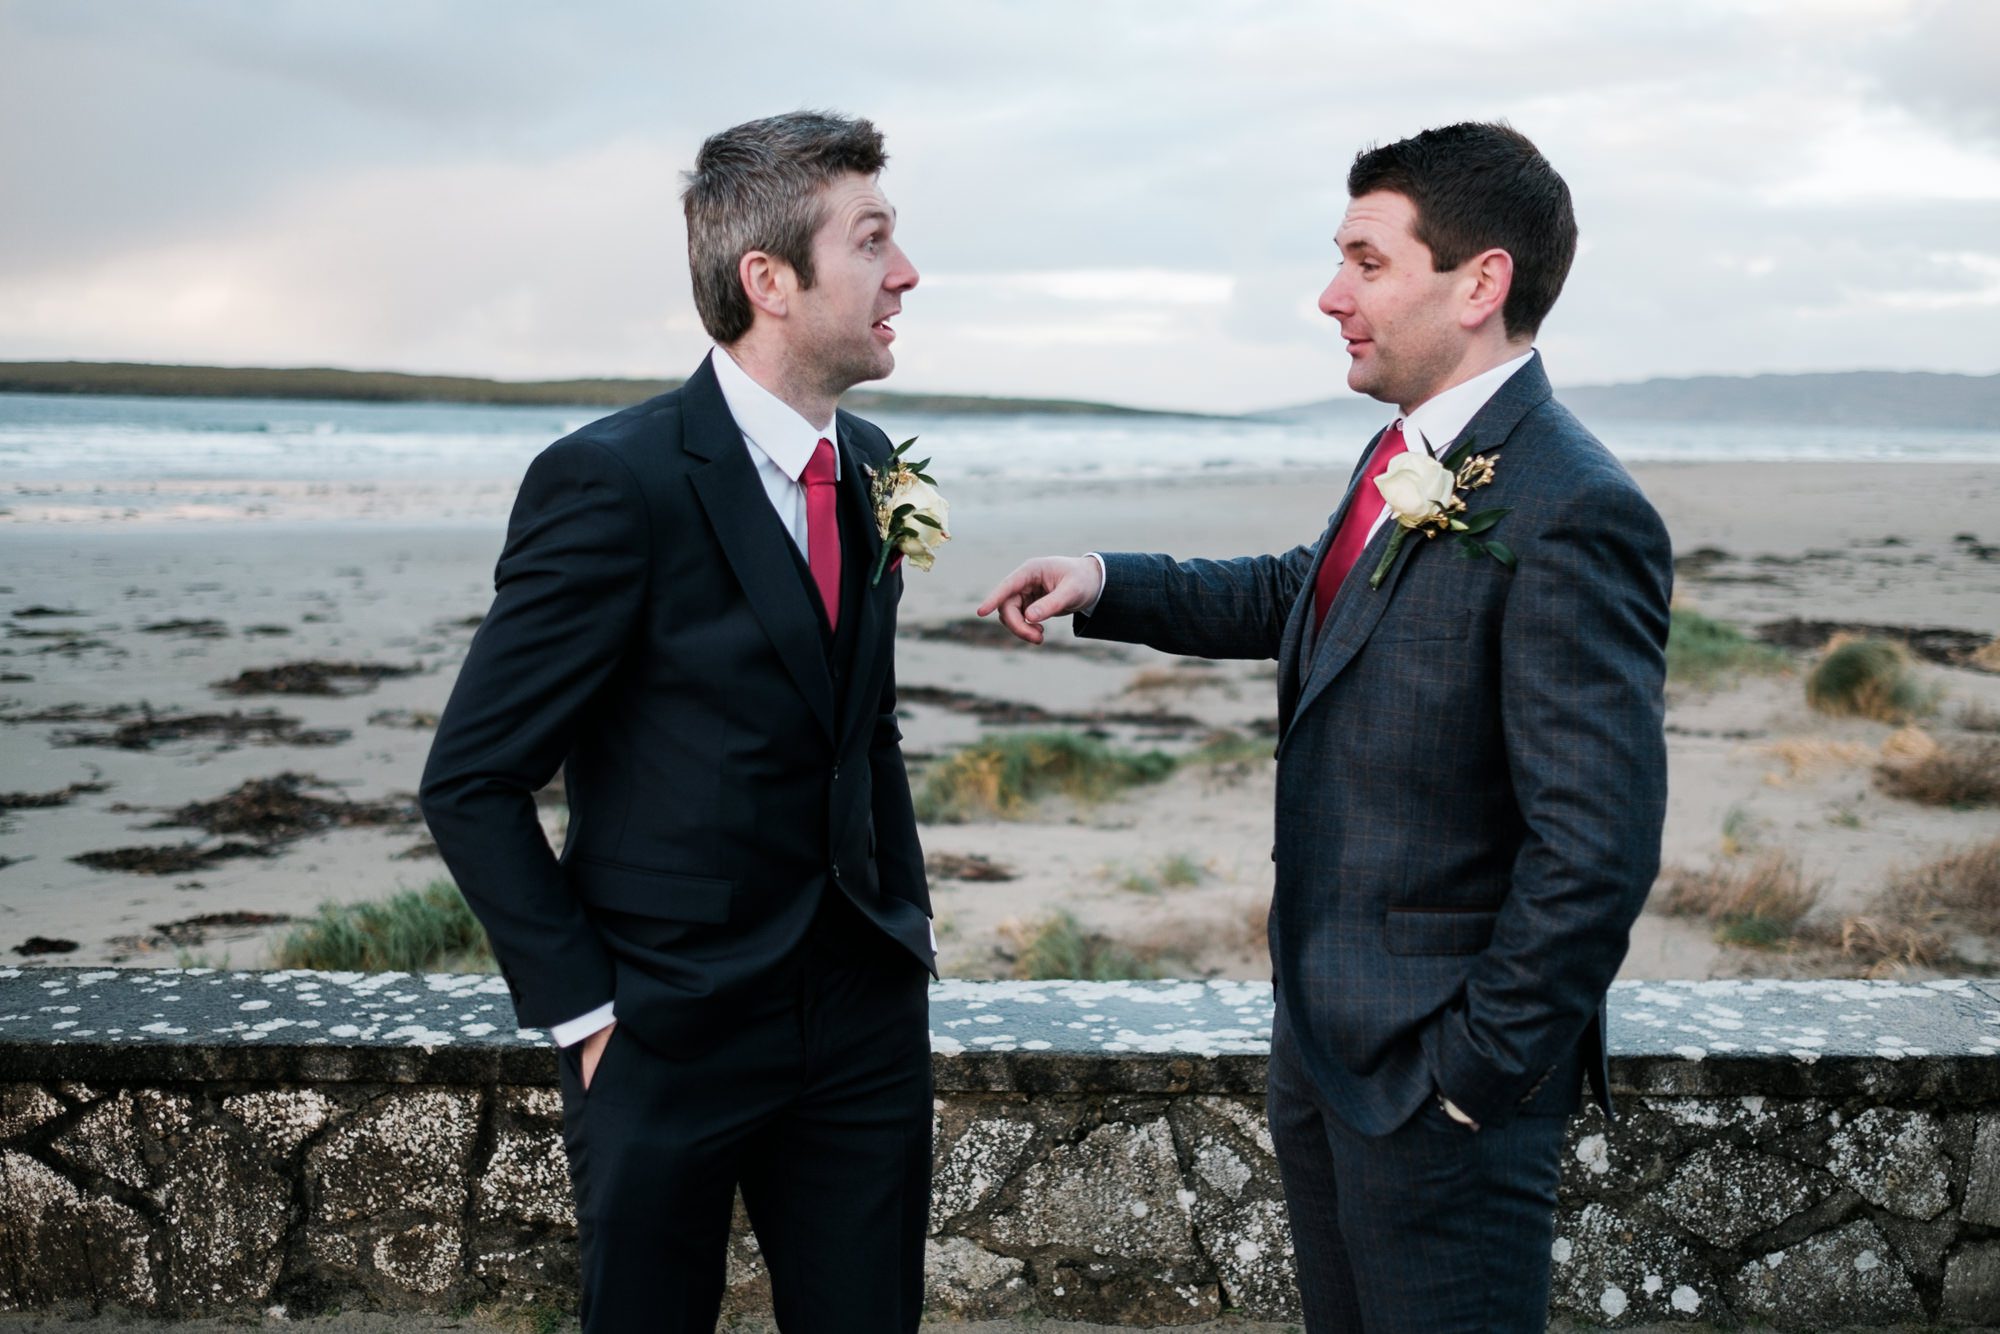 Getting married in Donegal rocks